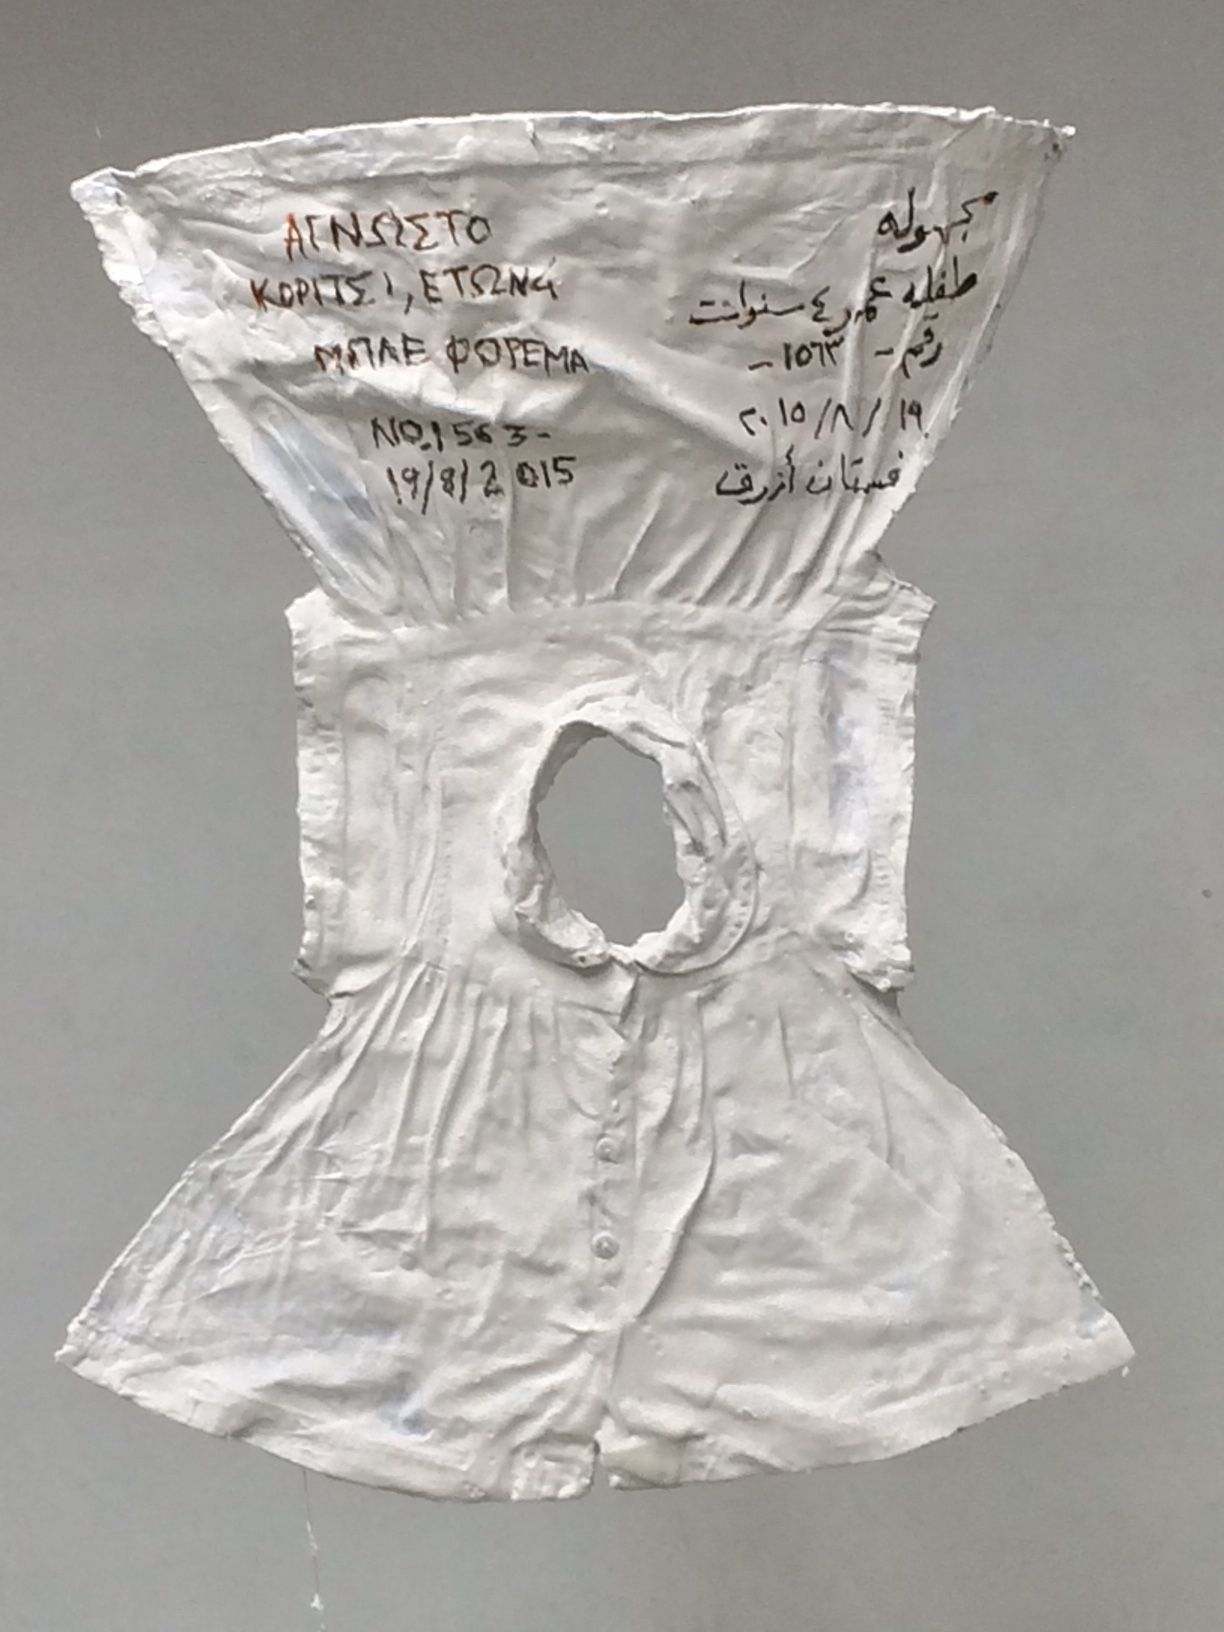 An item of refugee's clothing dipped in plaster, by Issam Kourbaj (2017). © the artist.